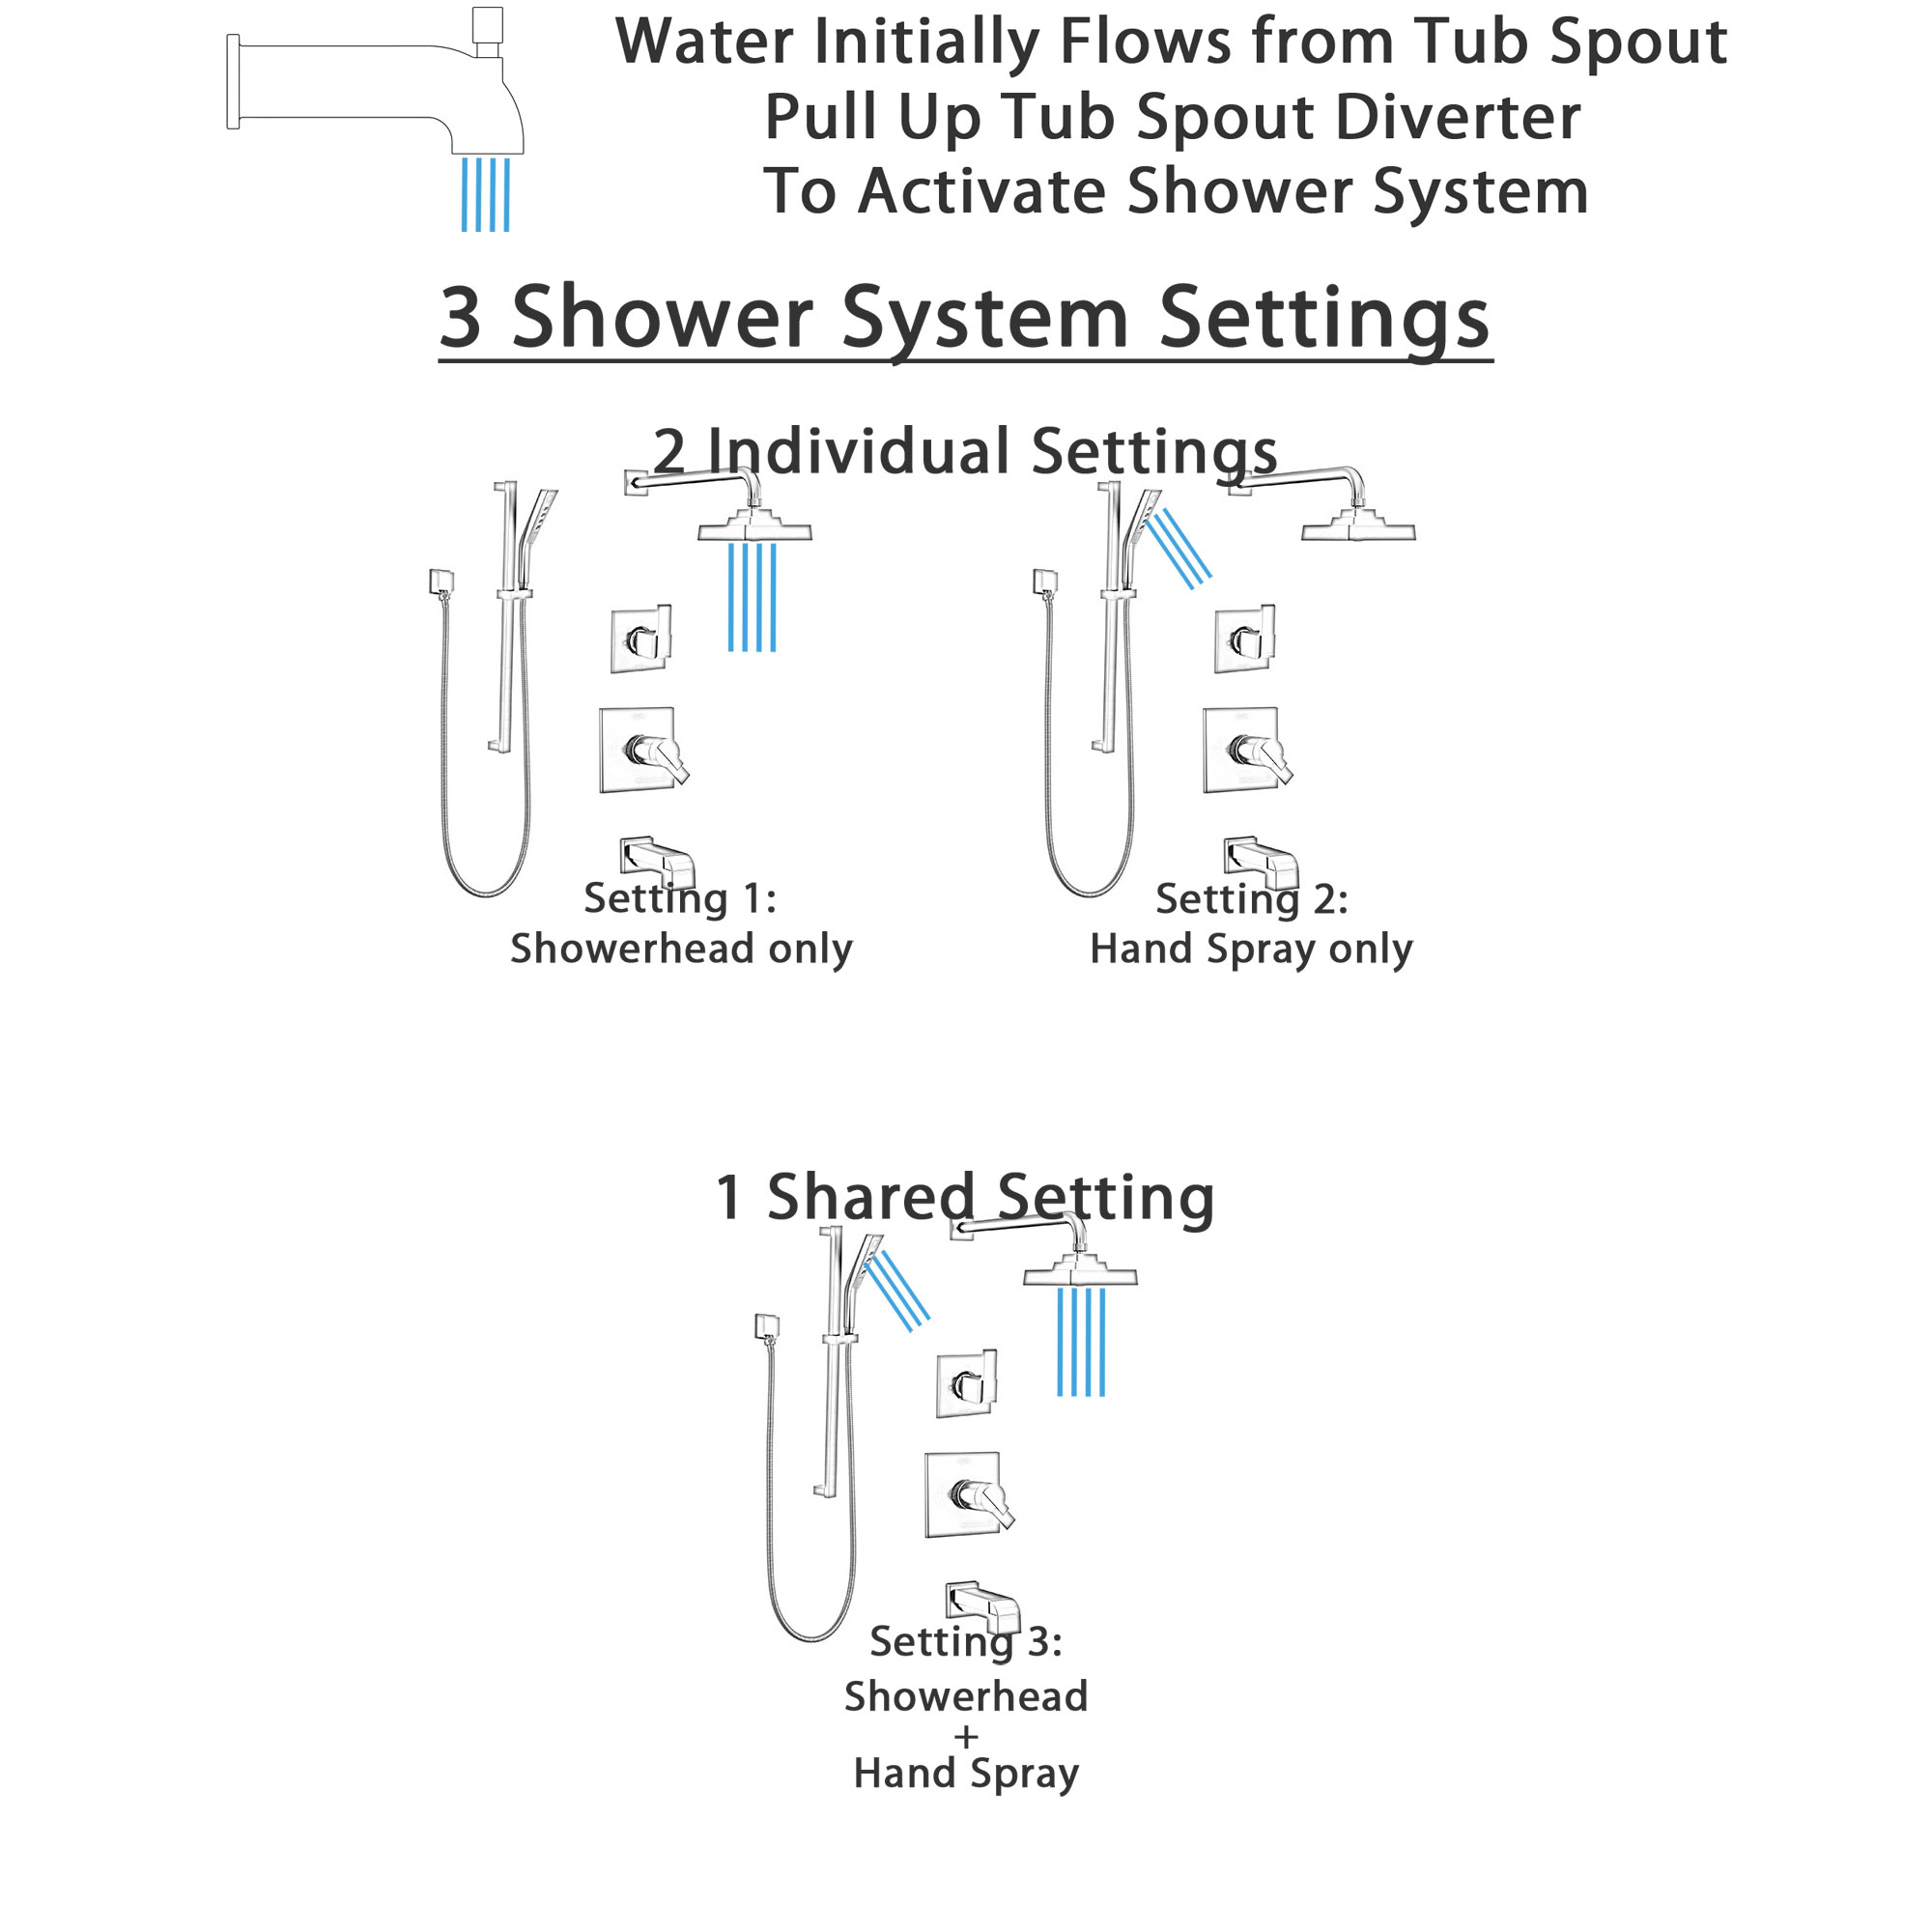 Delta Ara Matte Black Finish Thermostatic 17T Complete Tub and Shower System with Diverter, Showerhead, and Hand Sprayer on Slide Bar SS17T4673BL2